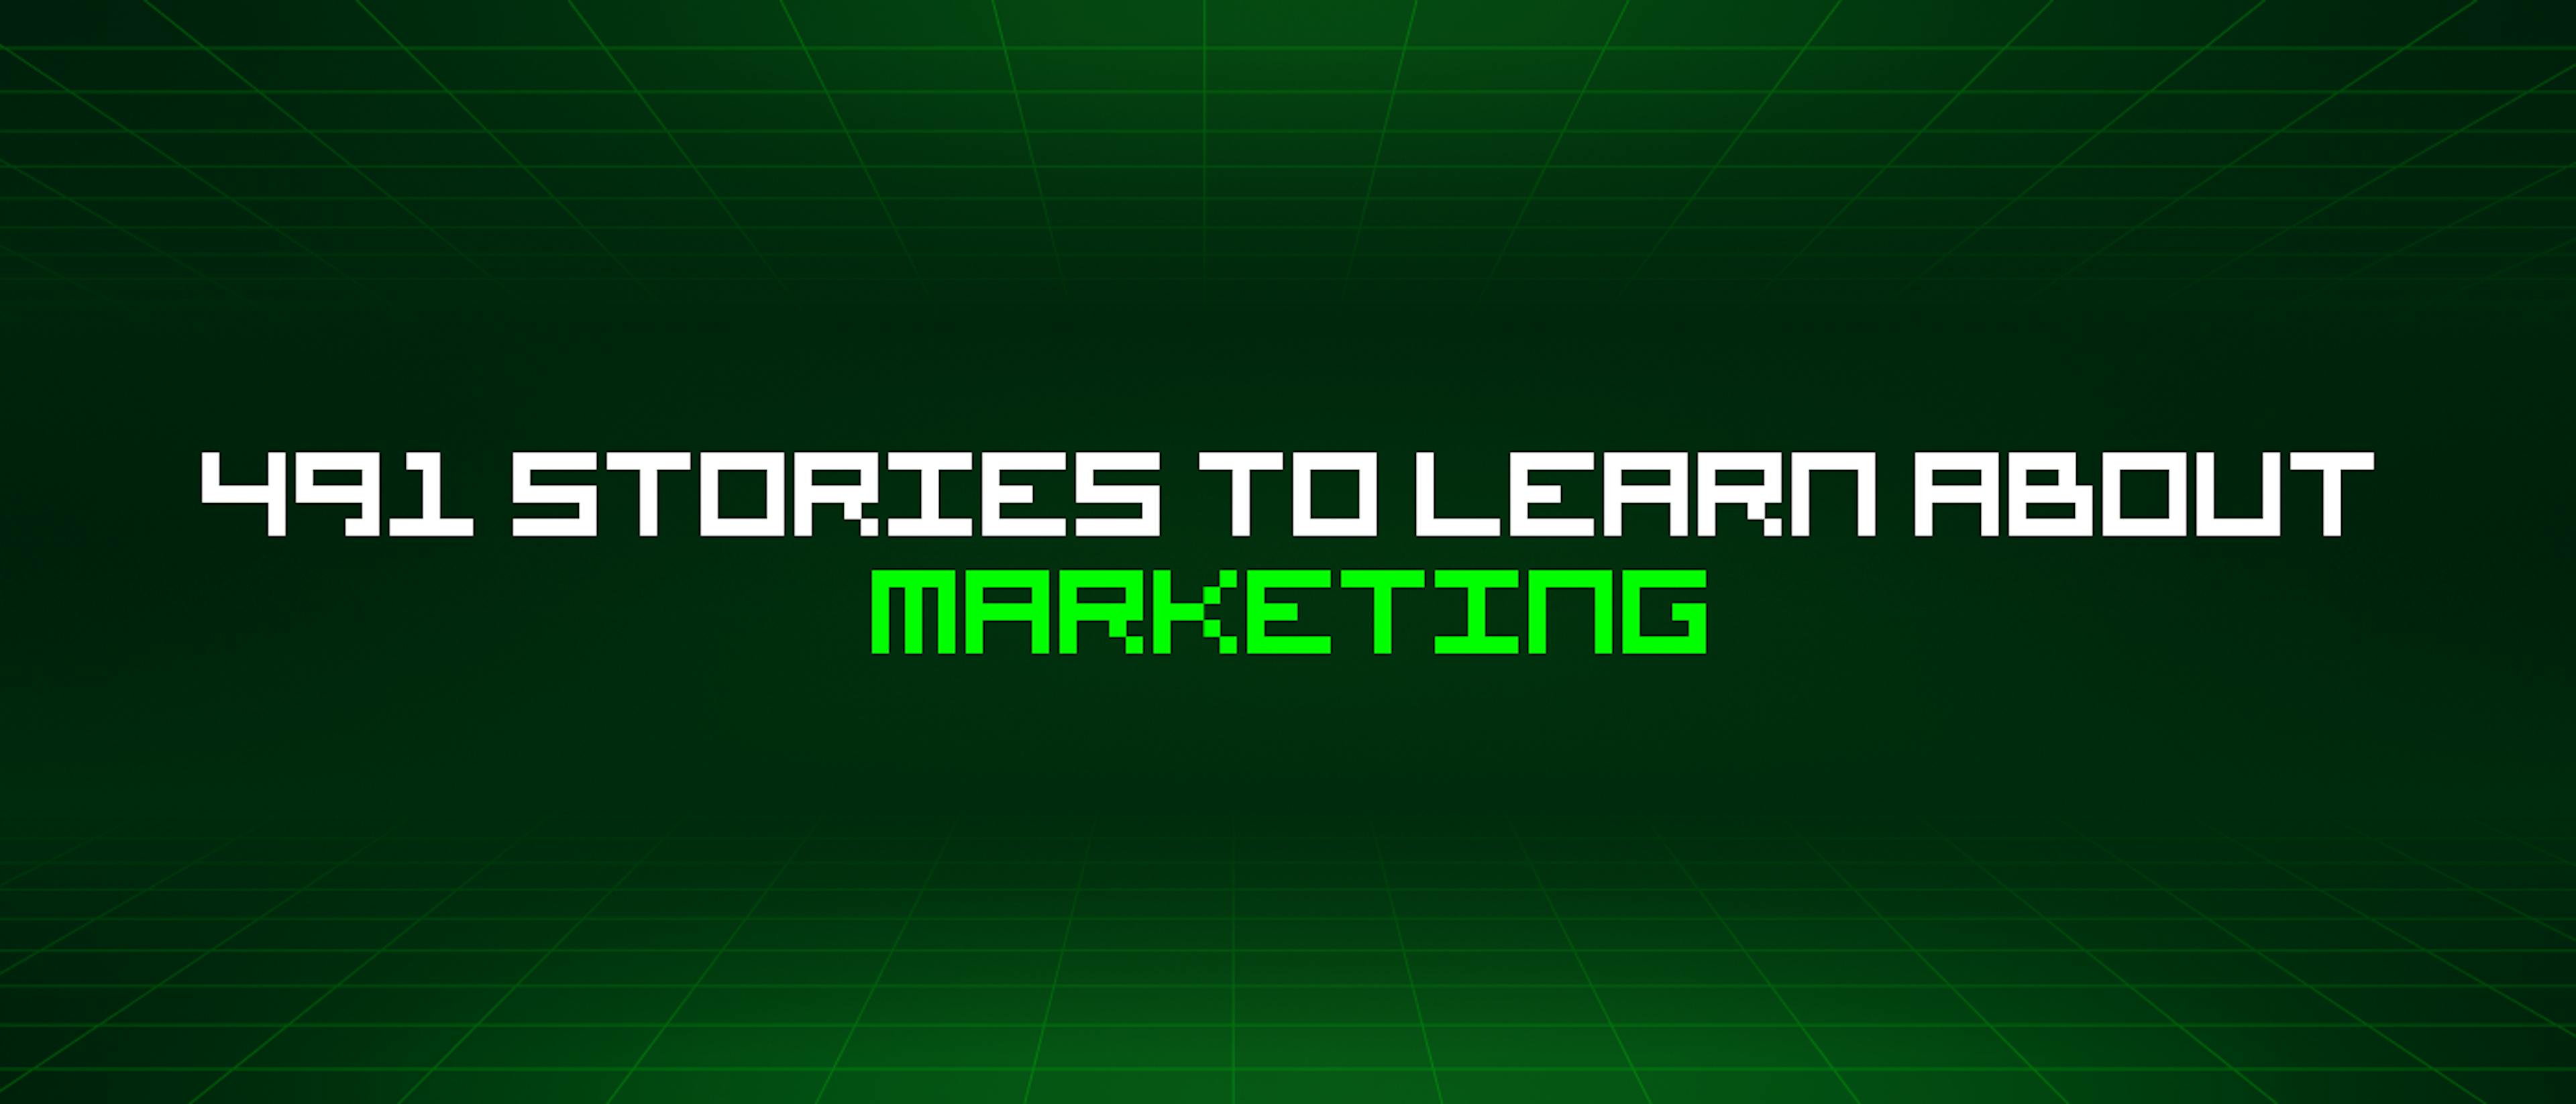 featured image - 491 Stories To Learn About Marketing